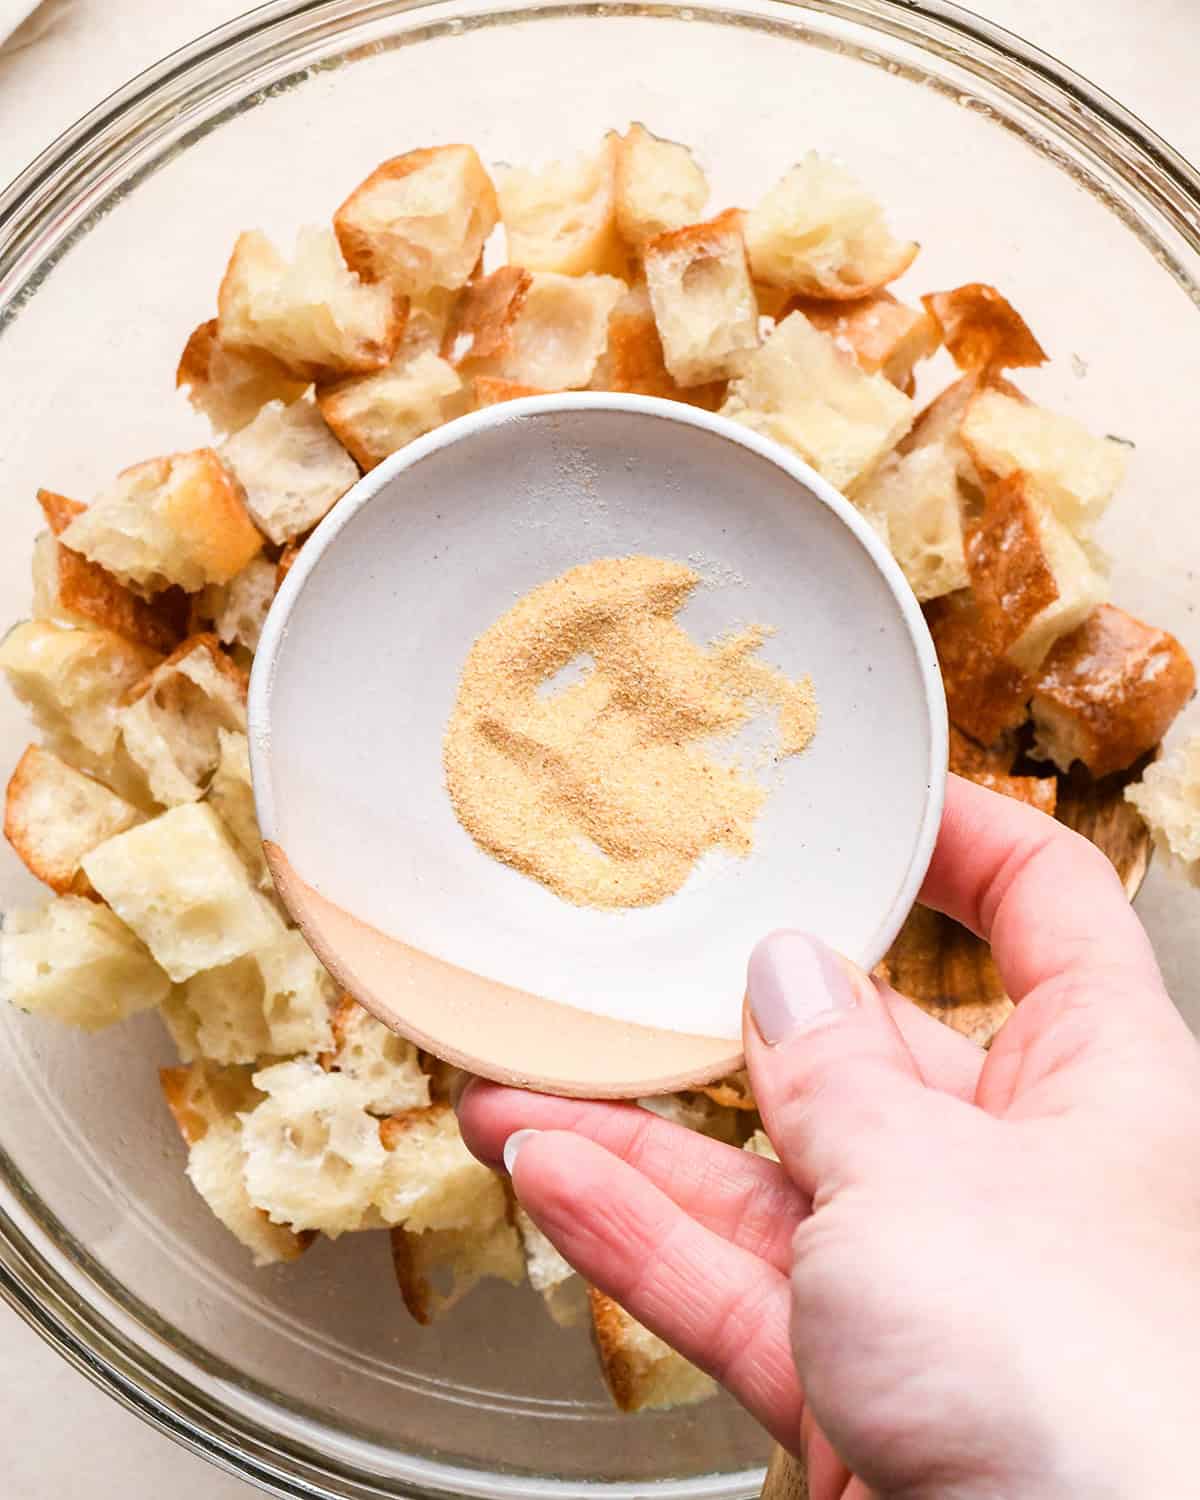 How to Make Croutons adding spice mixture to bread cubes in a bowl